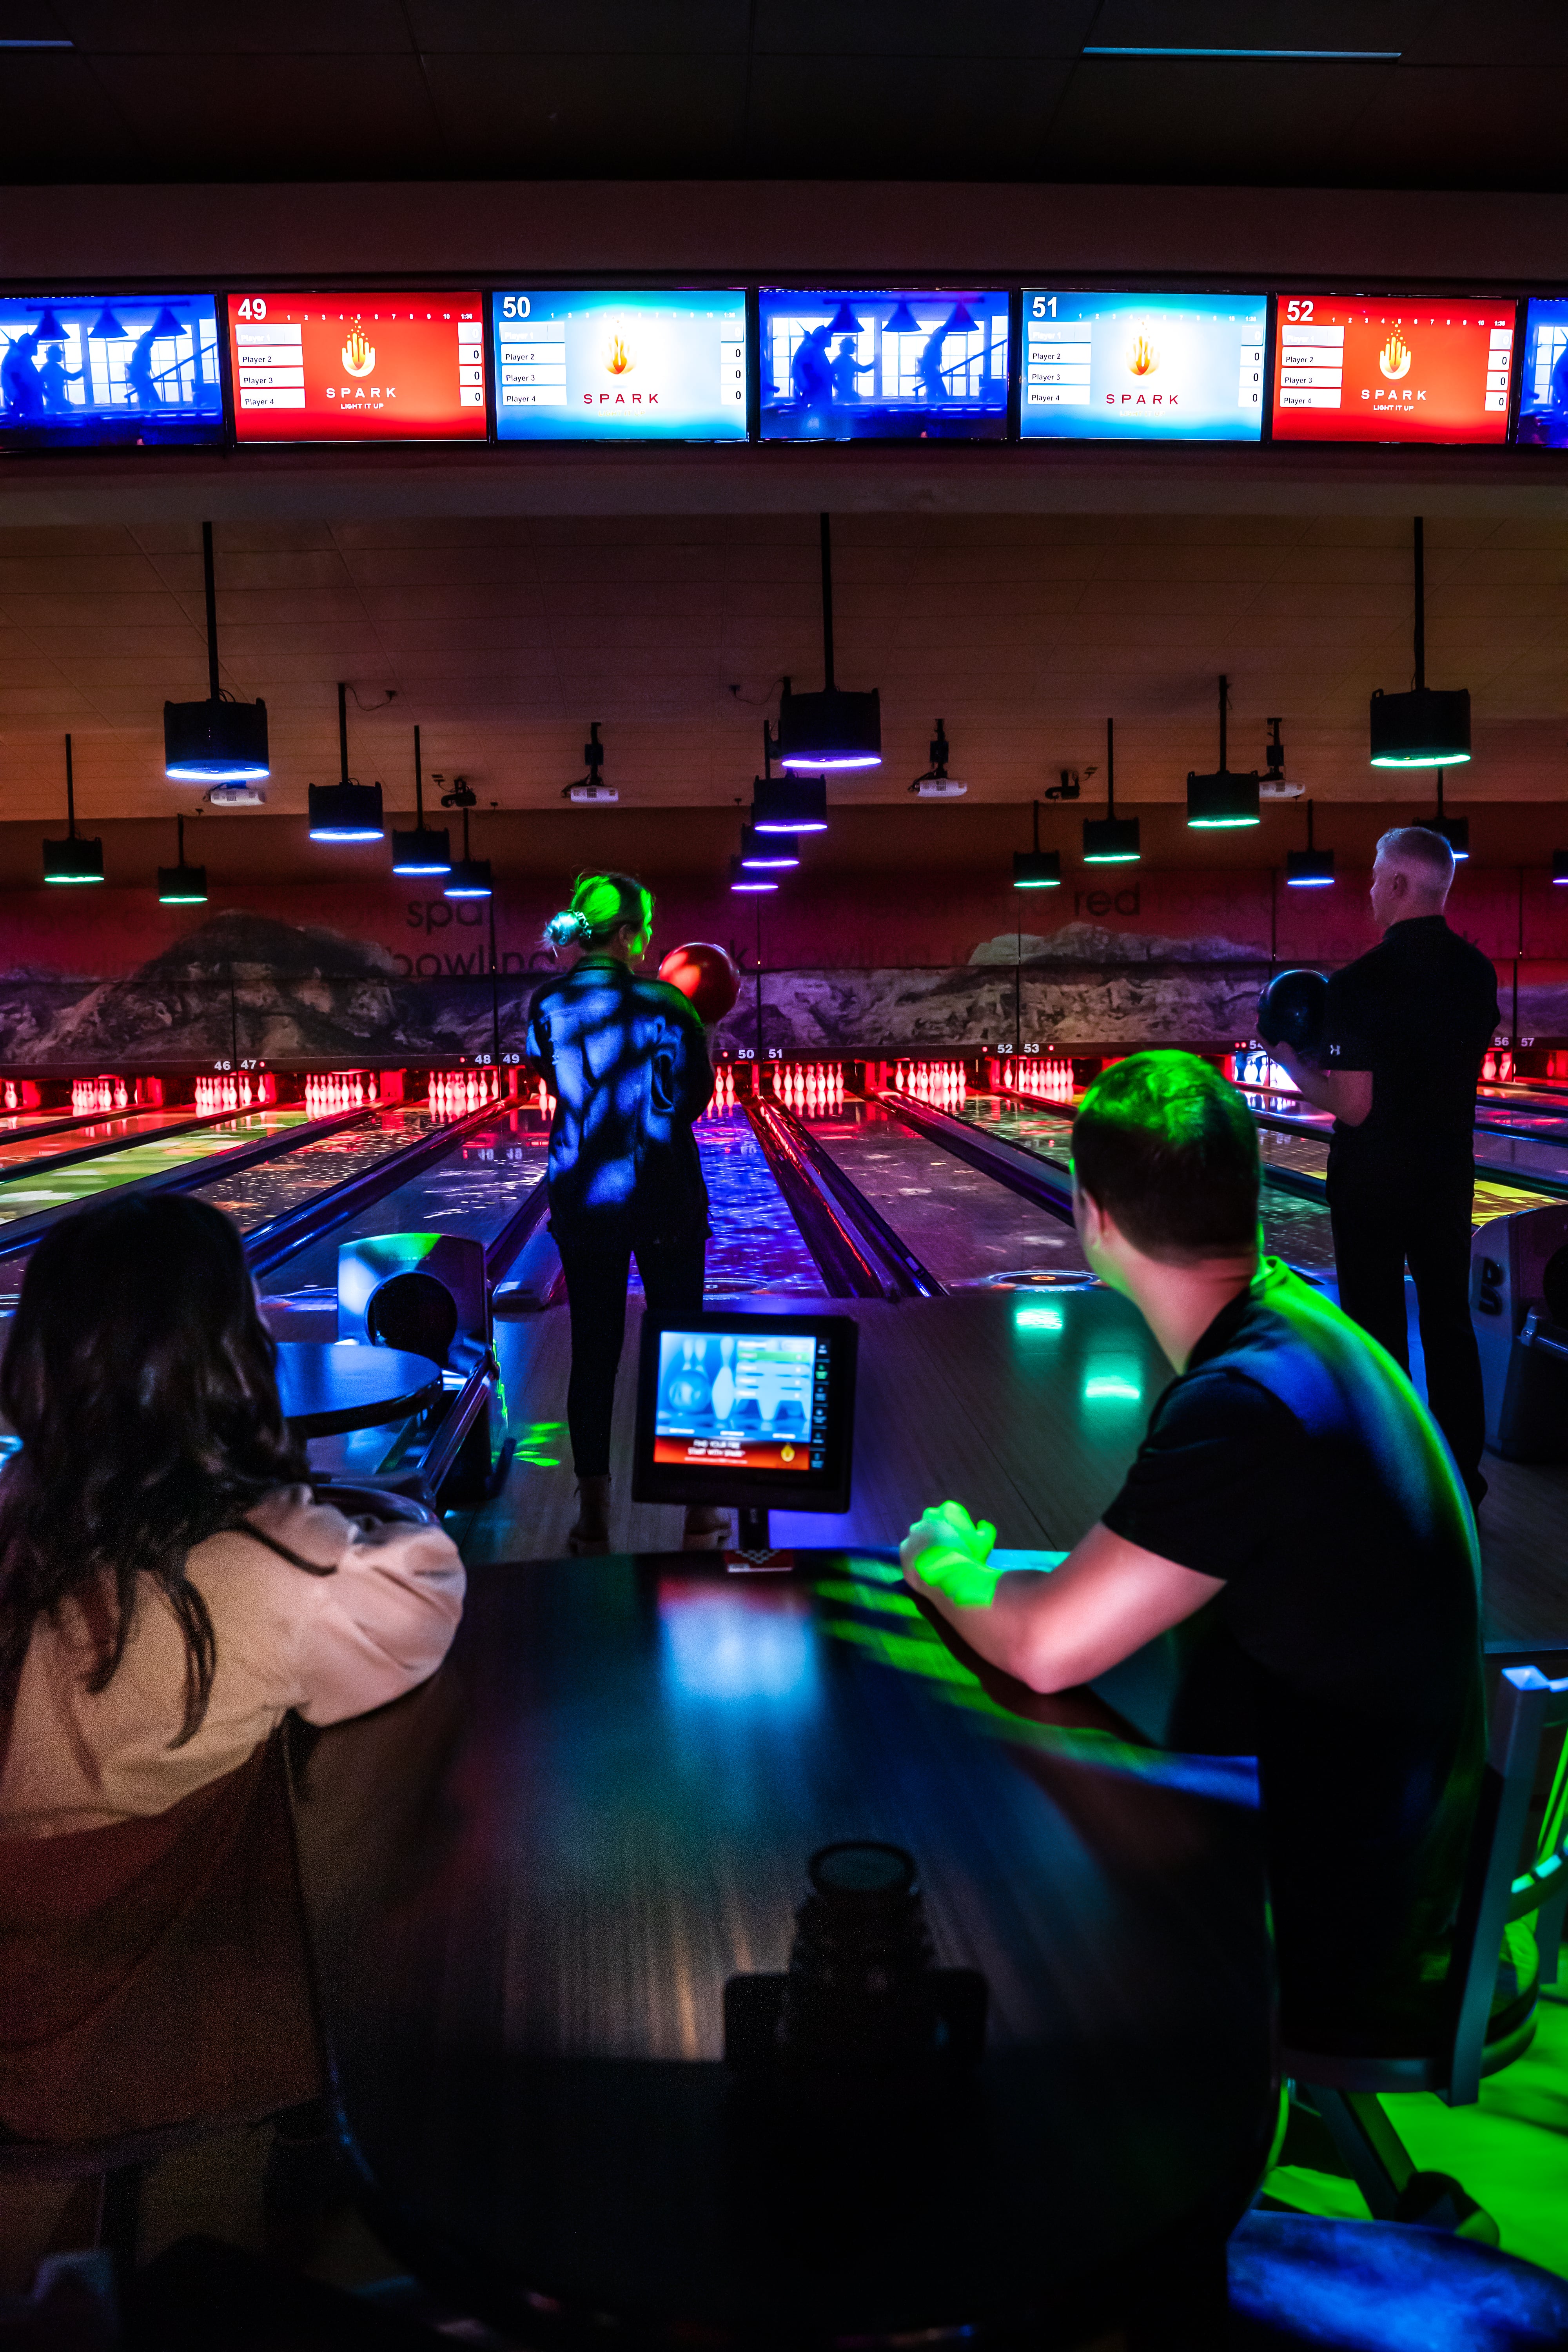 Spark Light It Up bowling experience